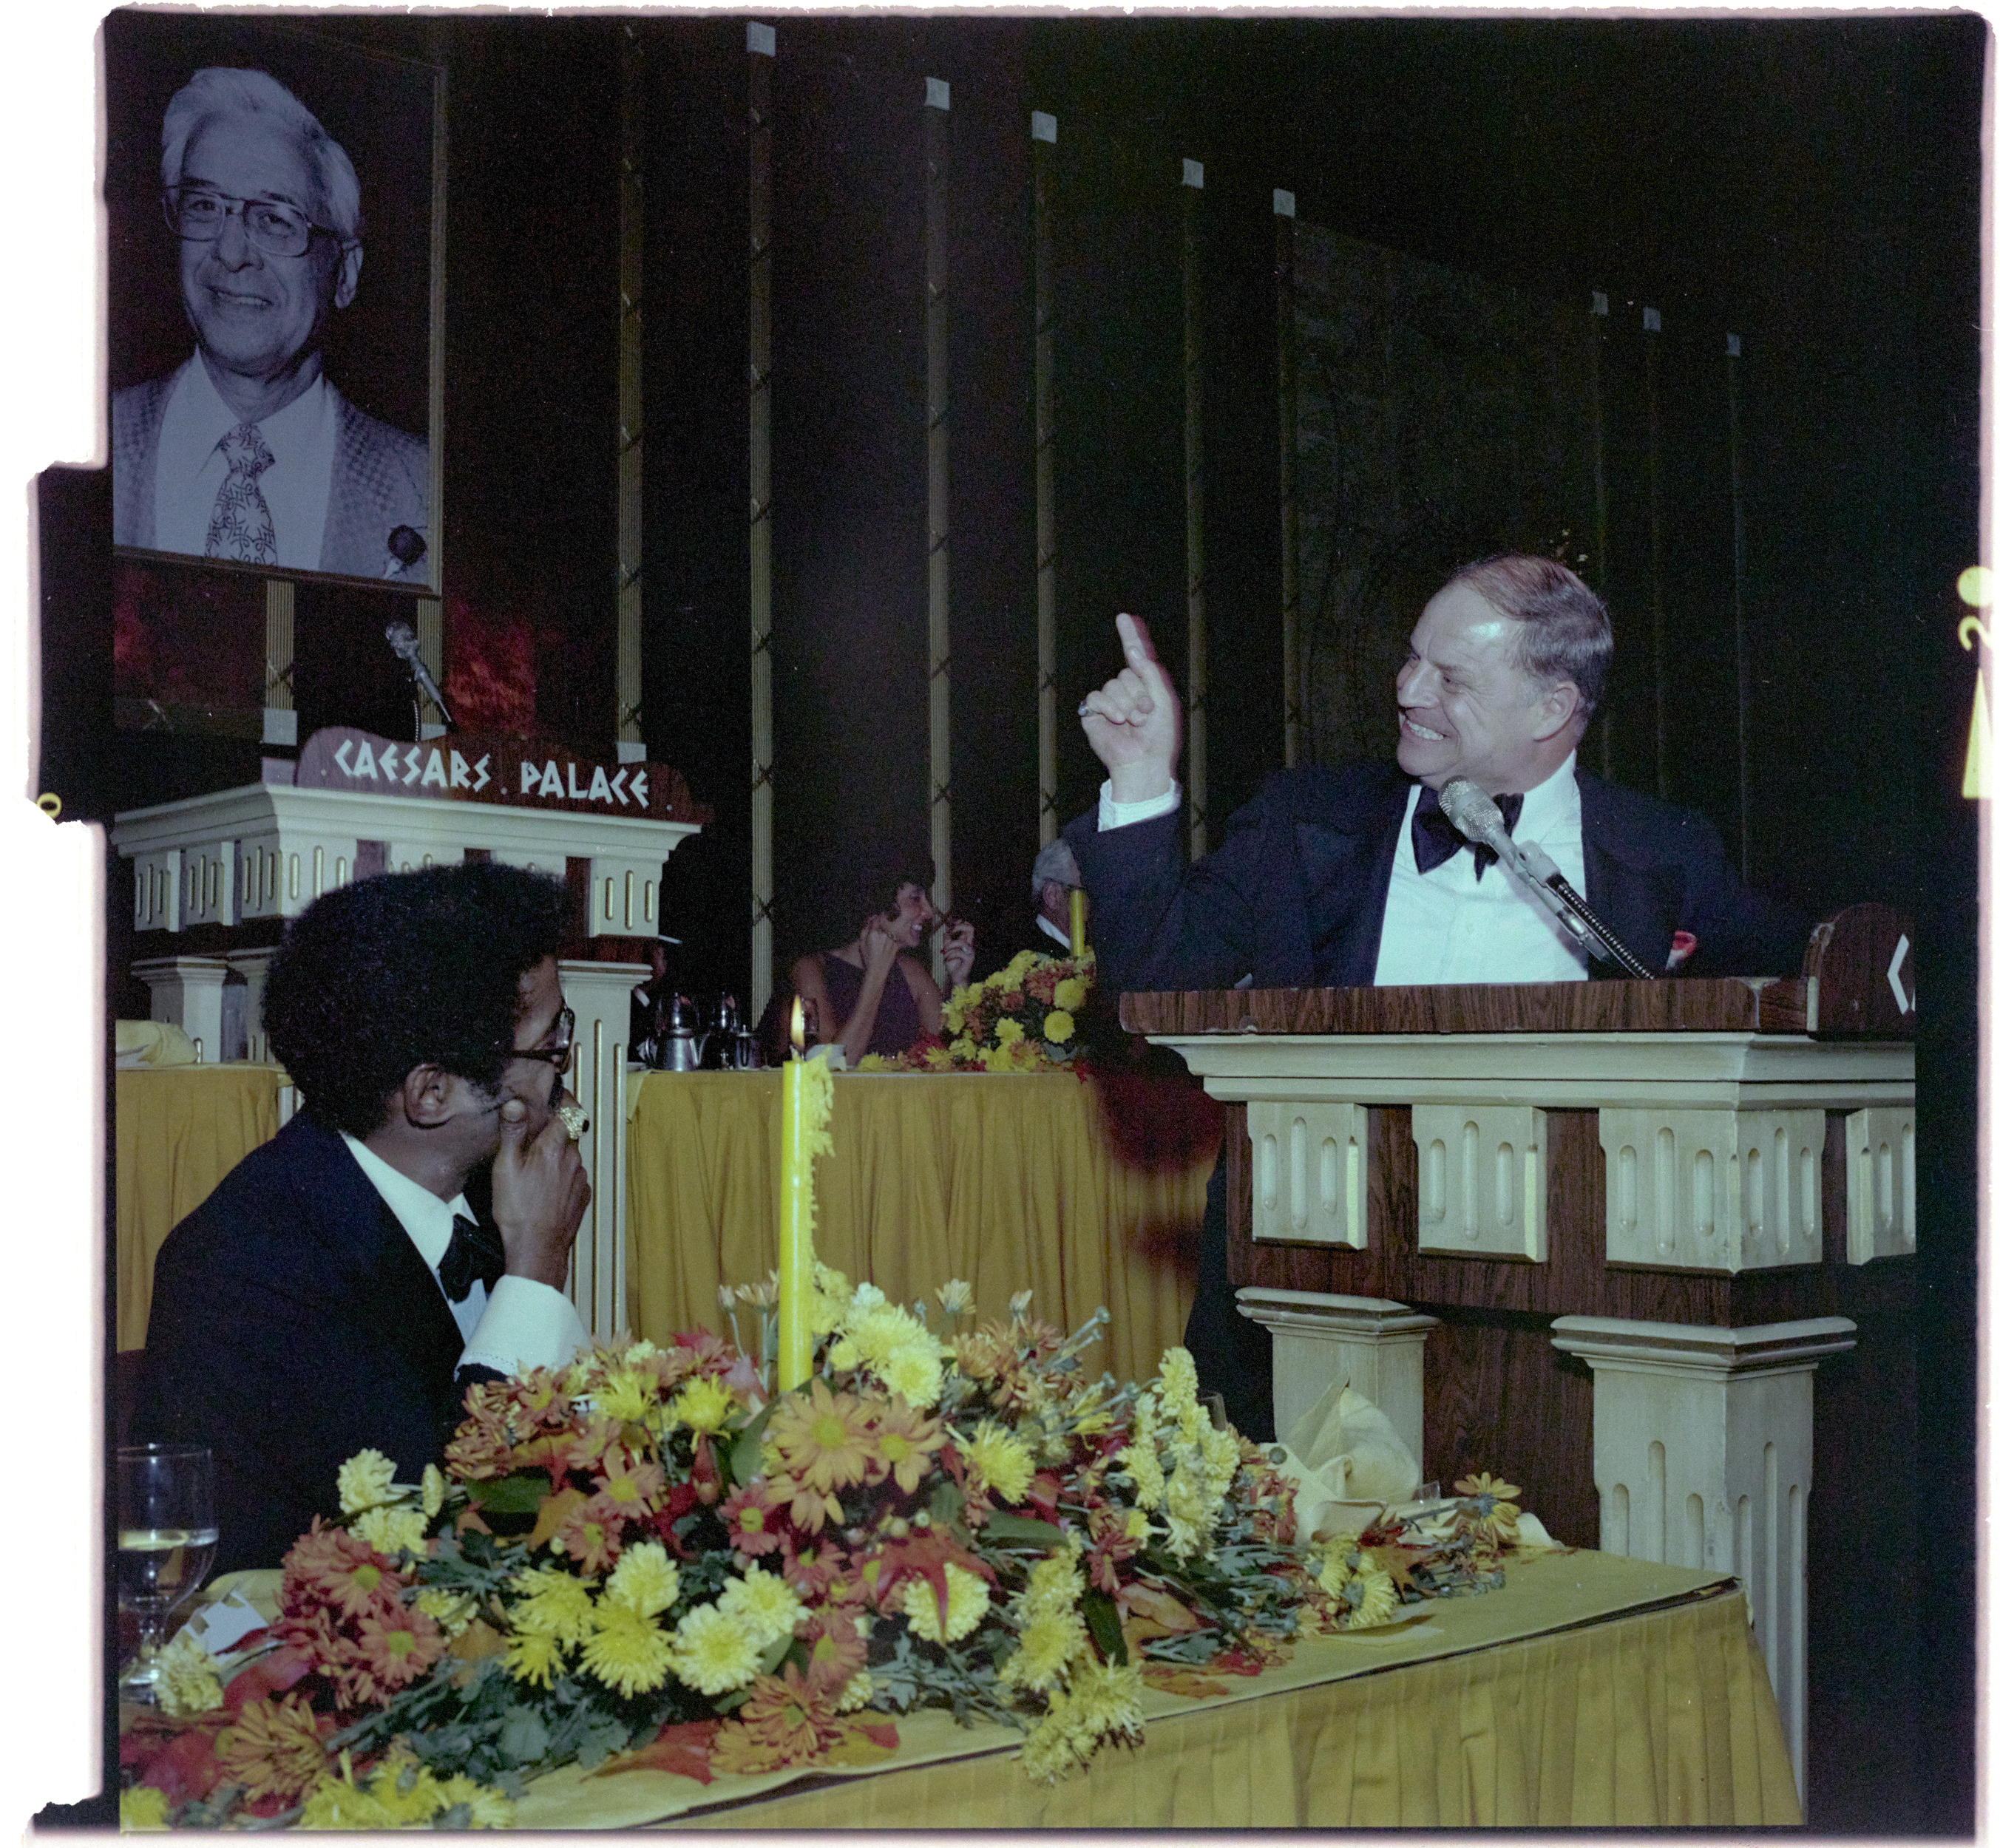 Photographs of Combined Jewish Appeal (Israel Bonds Dinner), image 14